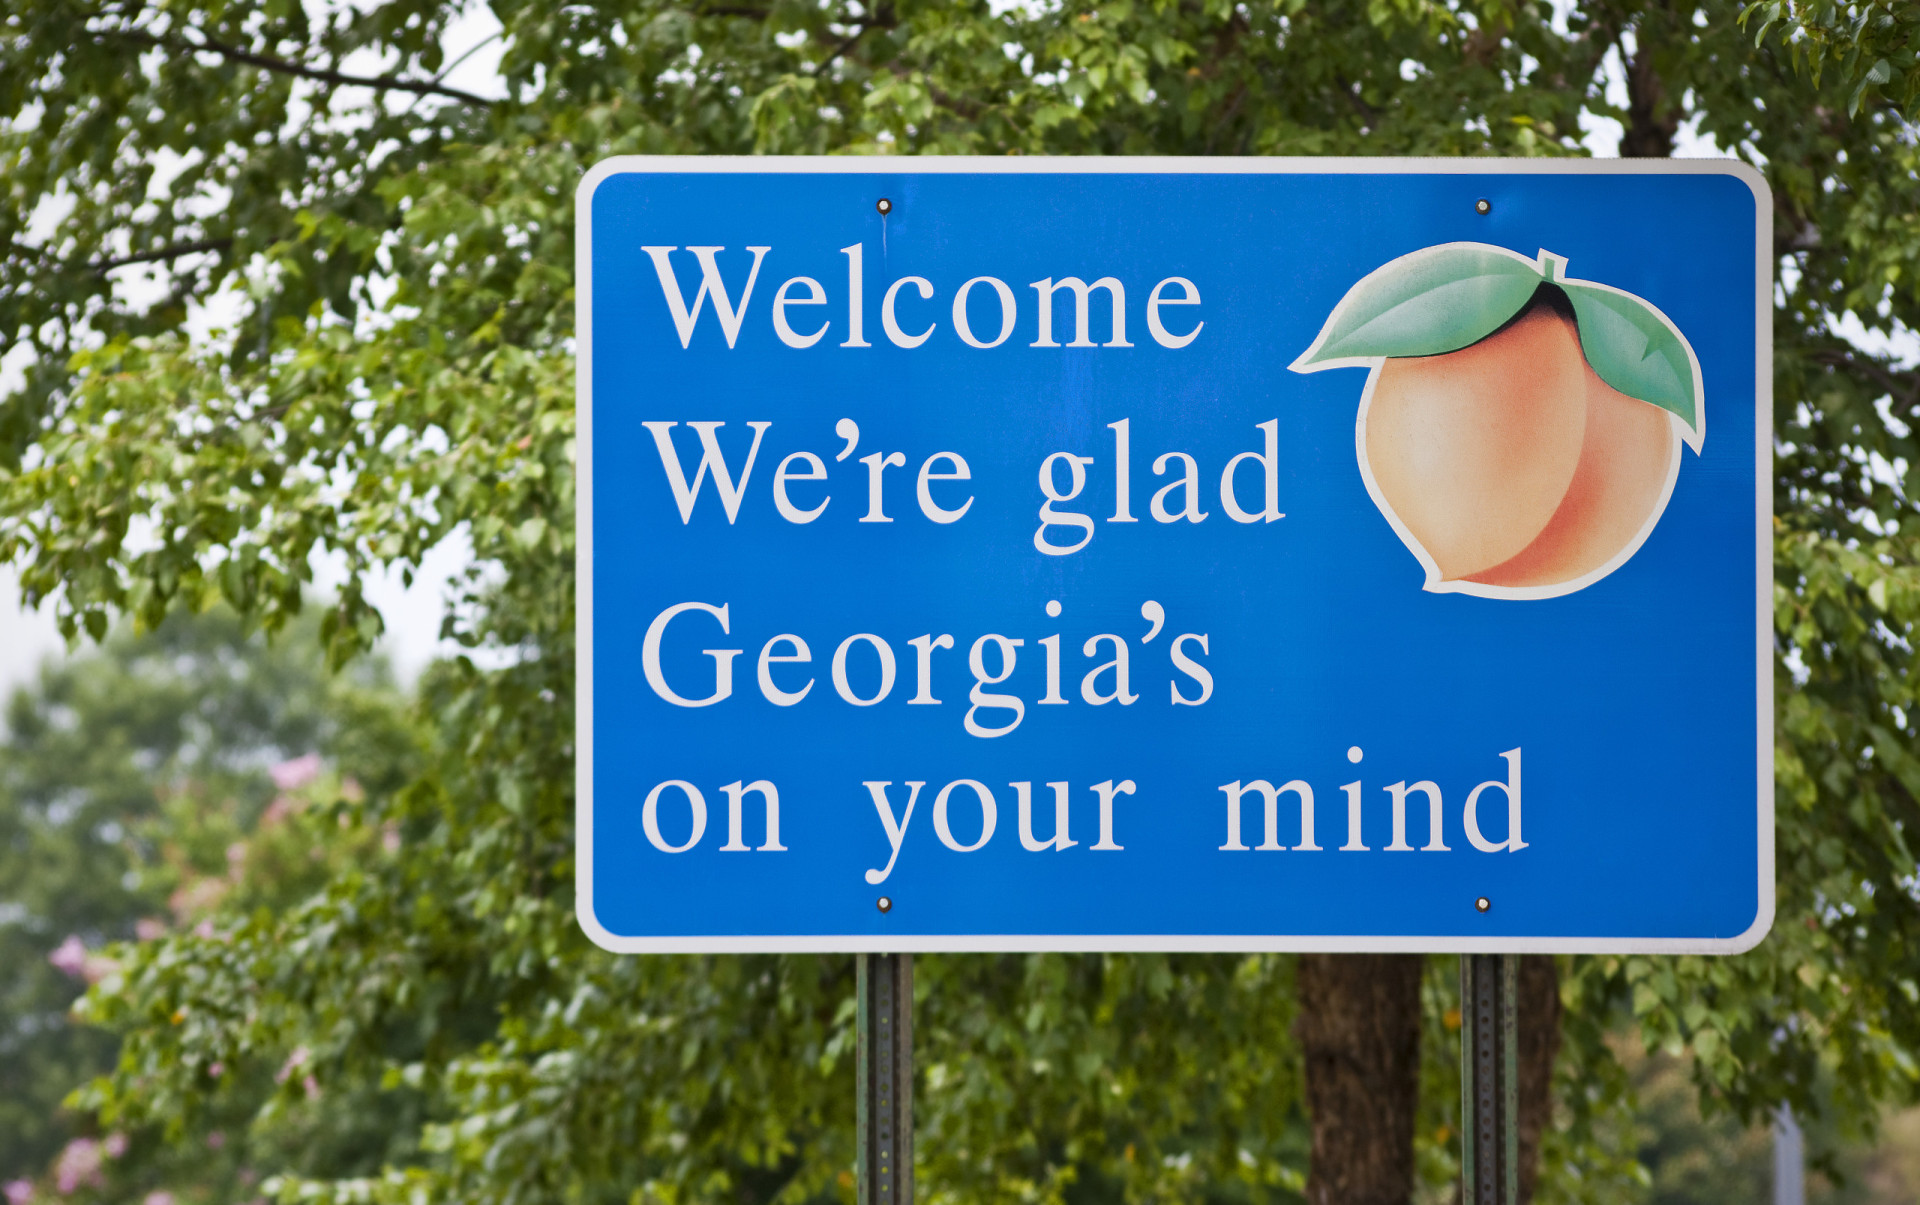 <p>Georgia's welcome sign makes reference to Hoagy Carmichael's and Stuart Gorrell's 1930 song 'Georgia on My Mind,' which was successfully covered by Ray Charles in 1960.</p><p>You may also like:<a href="https://www.starsinsider.com/n/261671?utm_source=msn.com&utm_medium=display&utm_campaign=referral_description&utm_content=572689en-en"> Celebs reveal the stories behind their stage names</a></p>